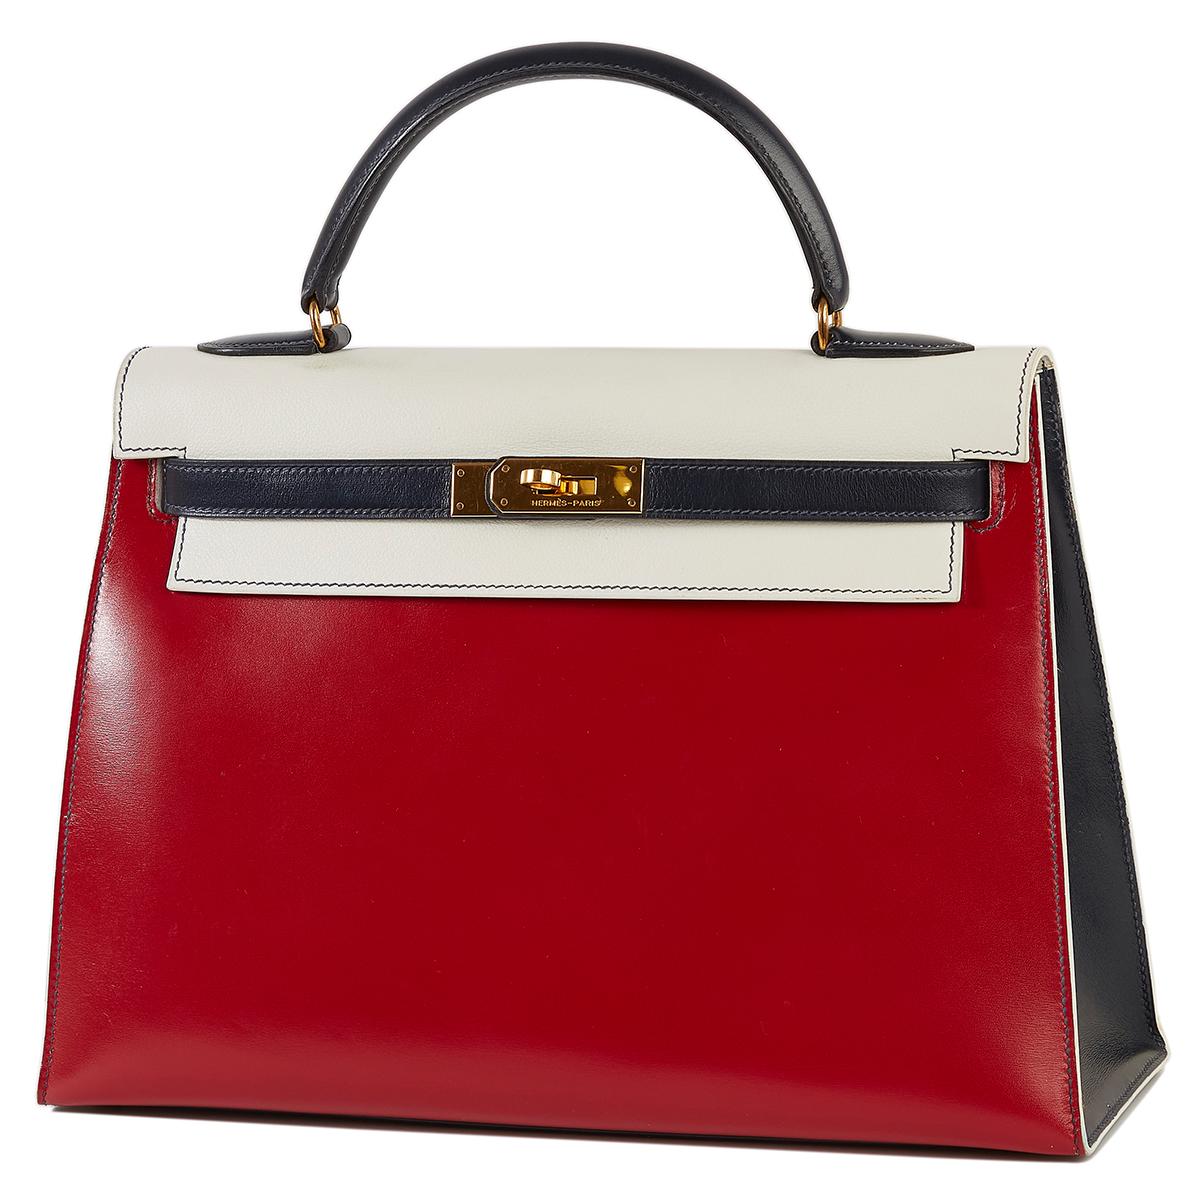 This Tri-Colour Sellier 32 cm Kelly bag from Hermès is a true testament to the quality of the house's craftsmanship, exuding timeless style and elegance, perfect for any occasion with Box Calf and Veau Graine leather and beautiful brushed palladium